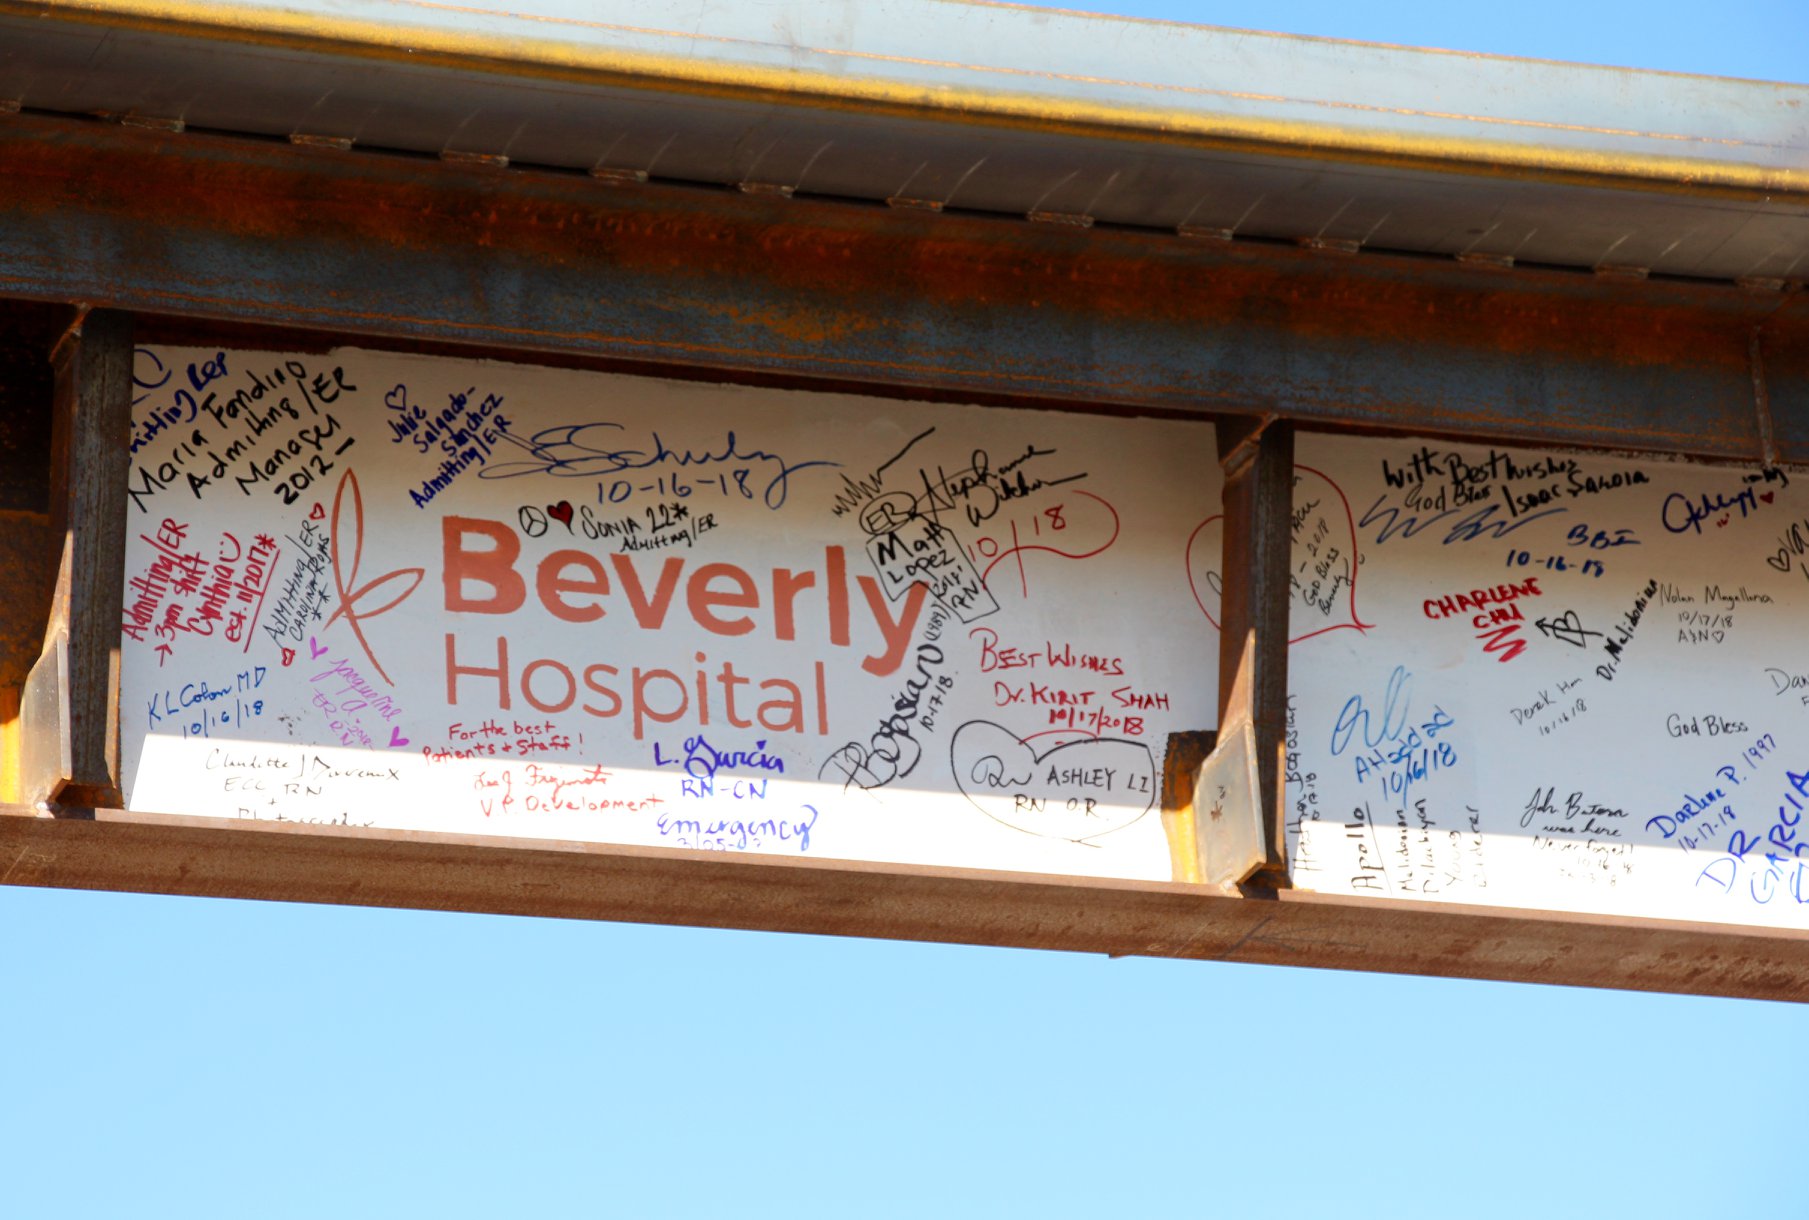 A close up shot of the Beverly Hospital logo surrounded by several hospital staff signatures on the final metal beam